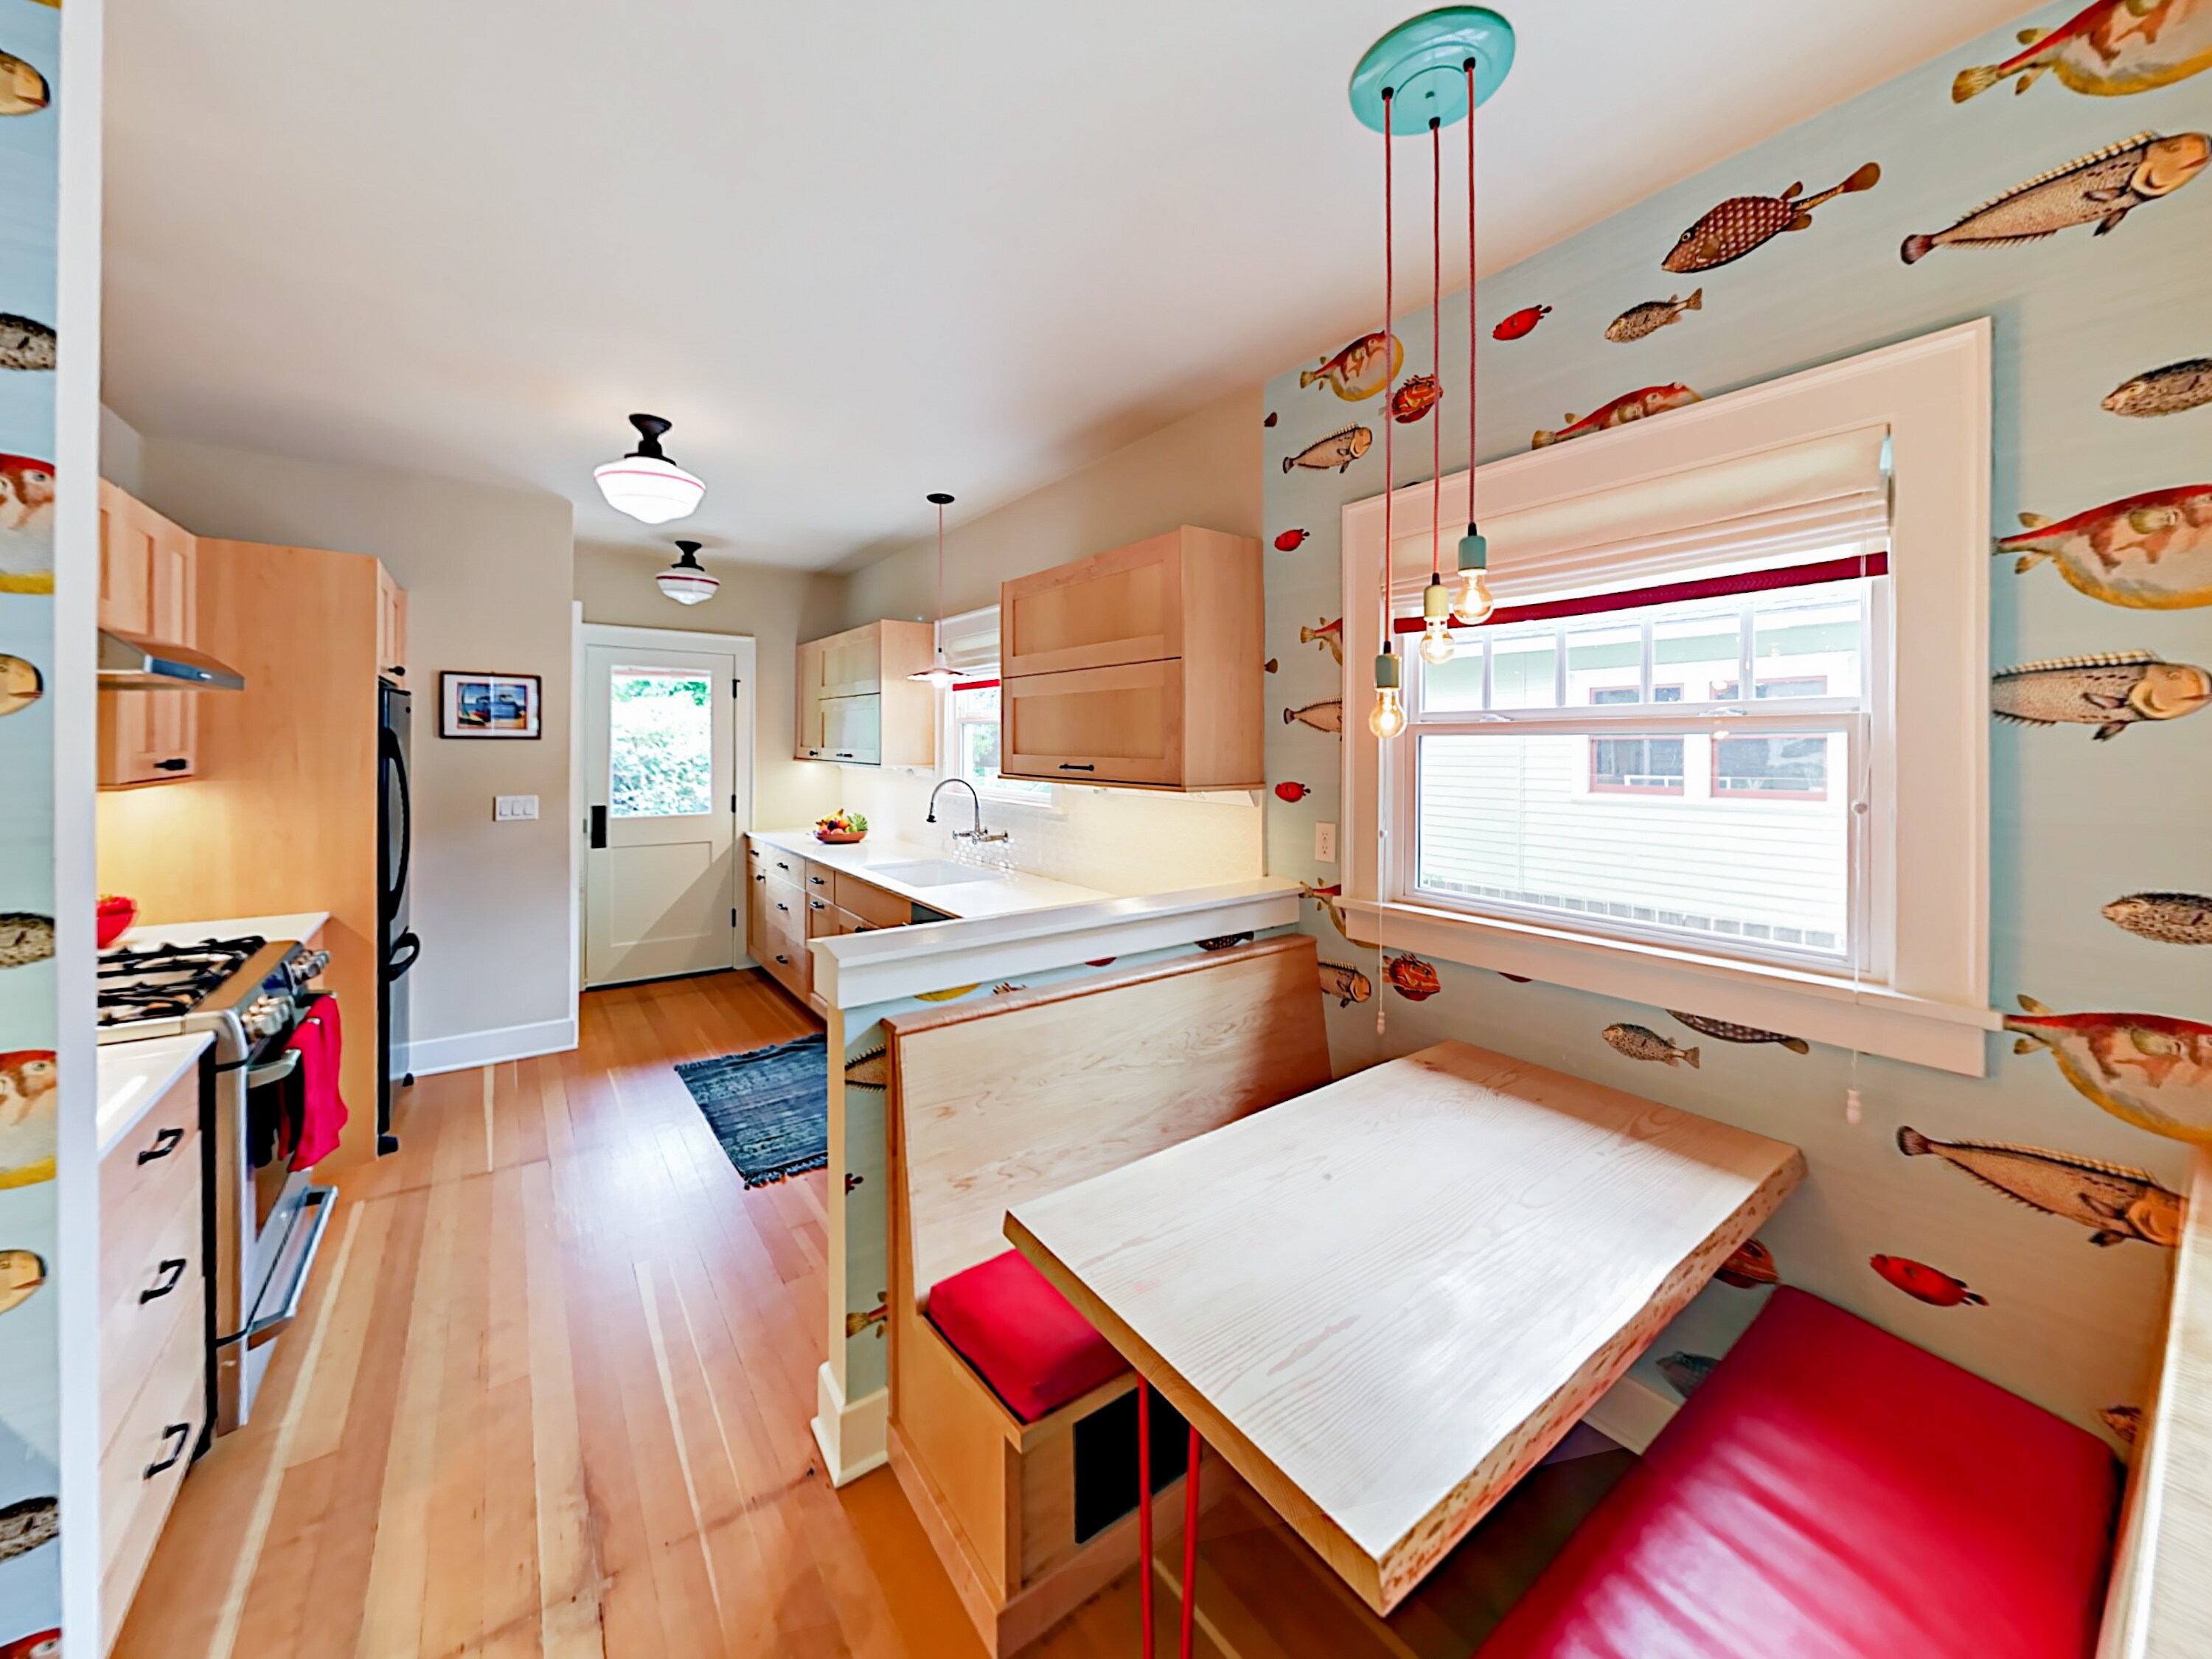 Welcome to Ballard! This charming home is professionally managed by TurnKey Vacation Rentals.